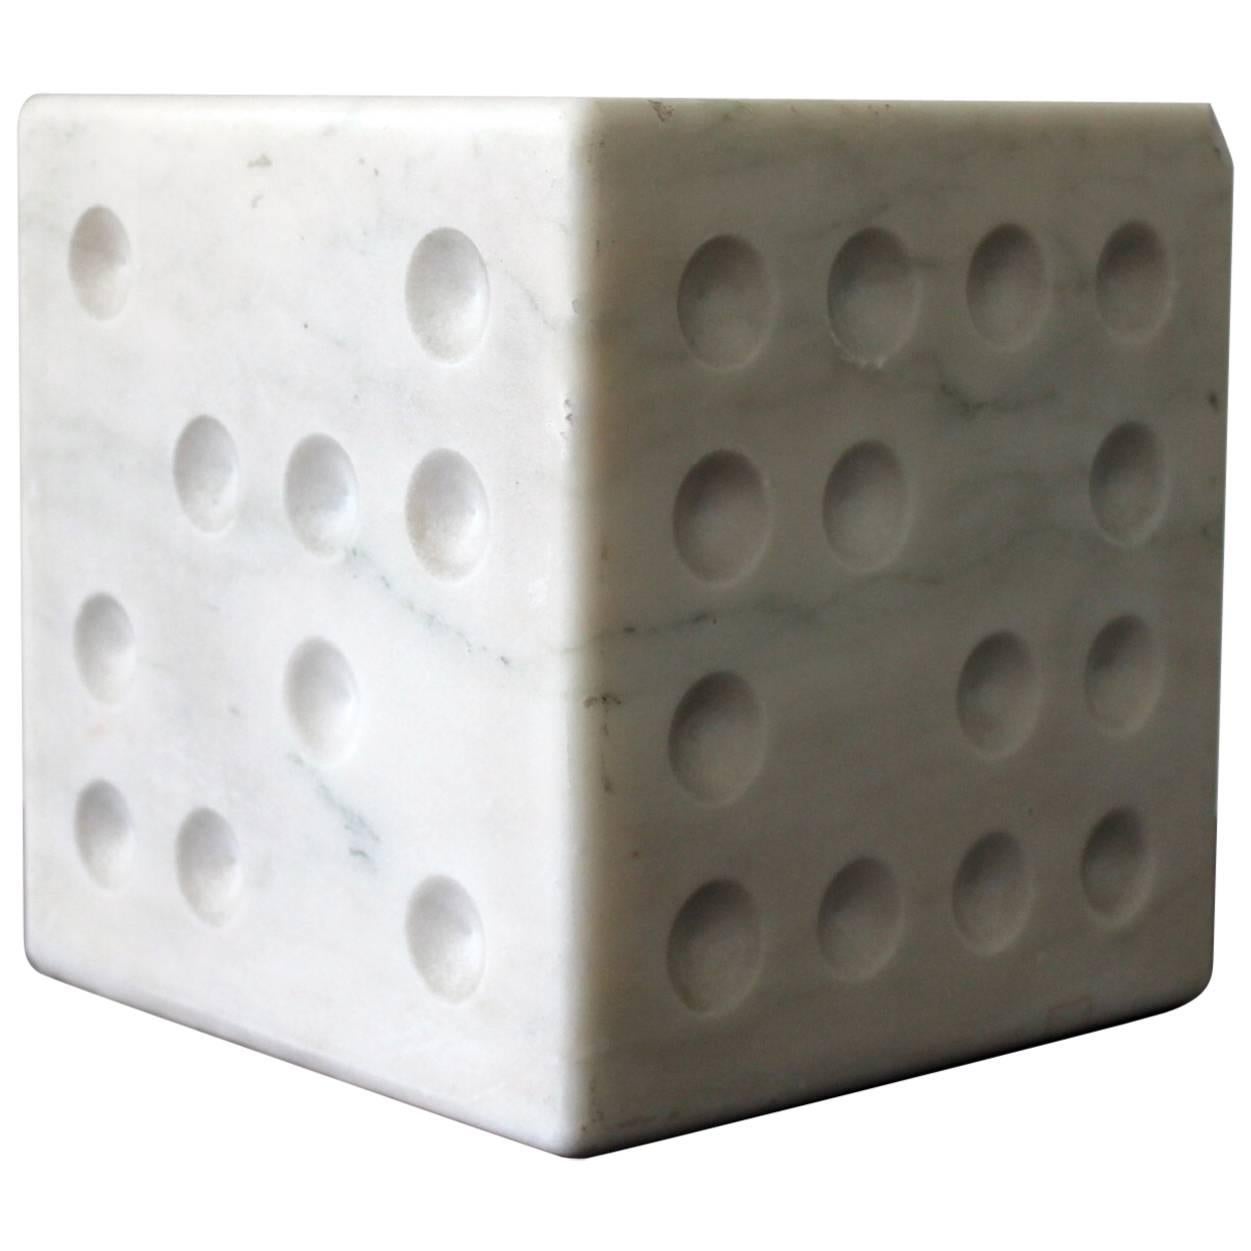 Marble Dice Sculpture For Sale